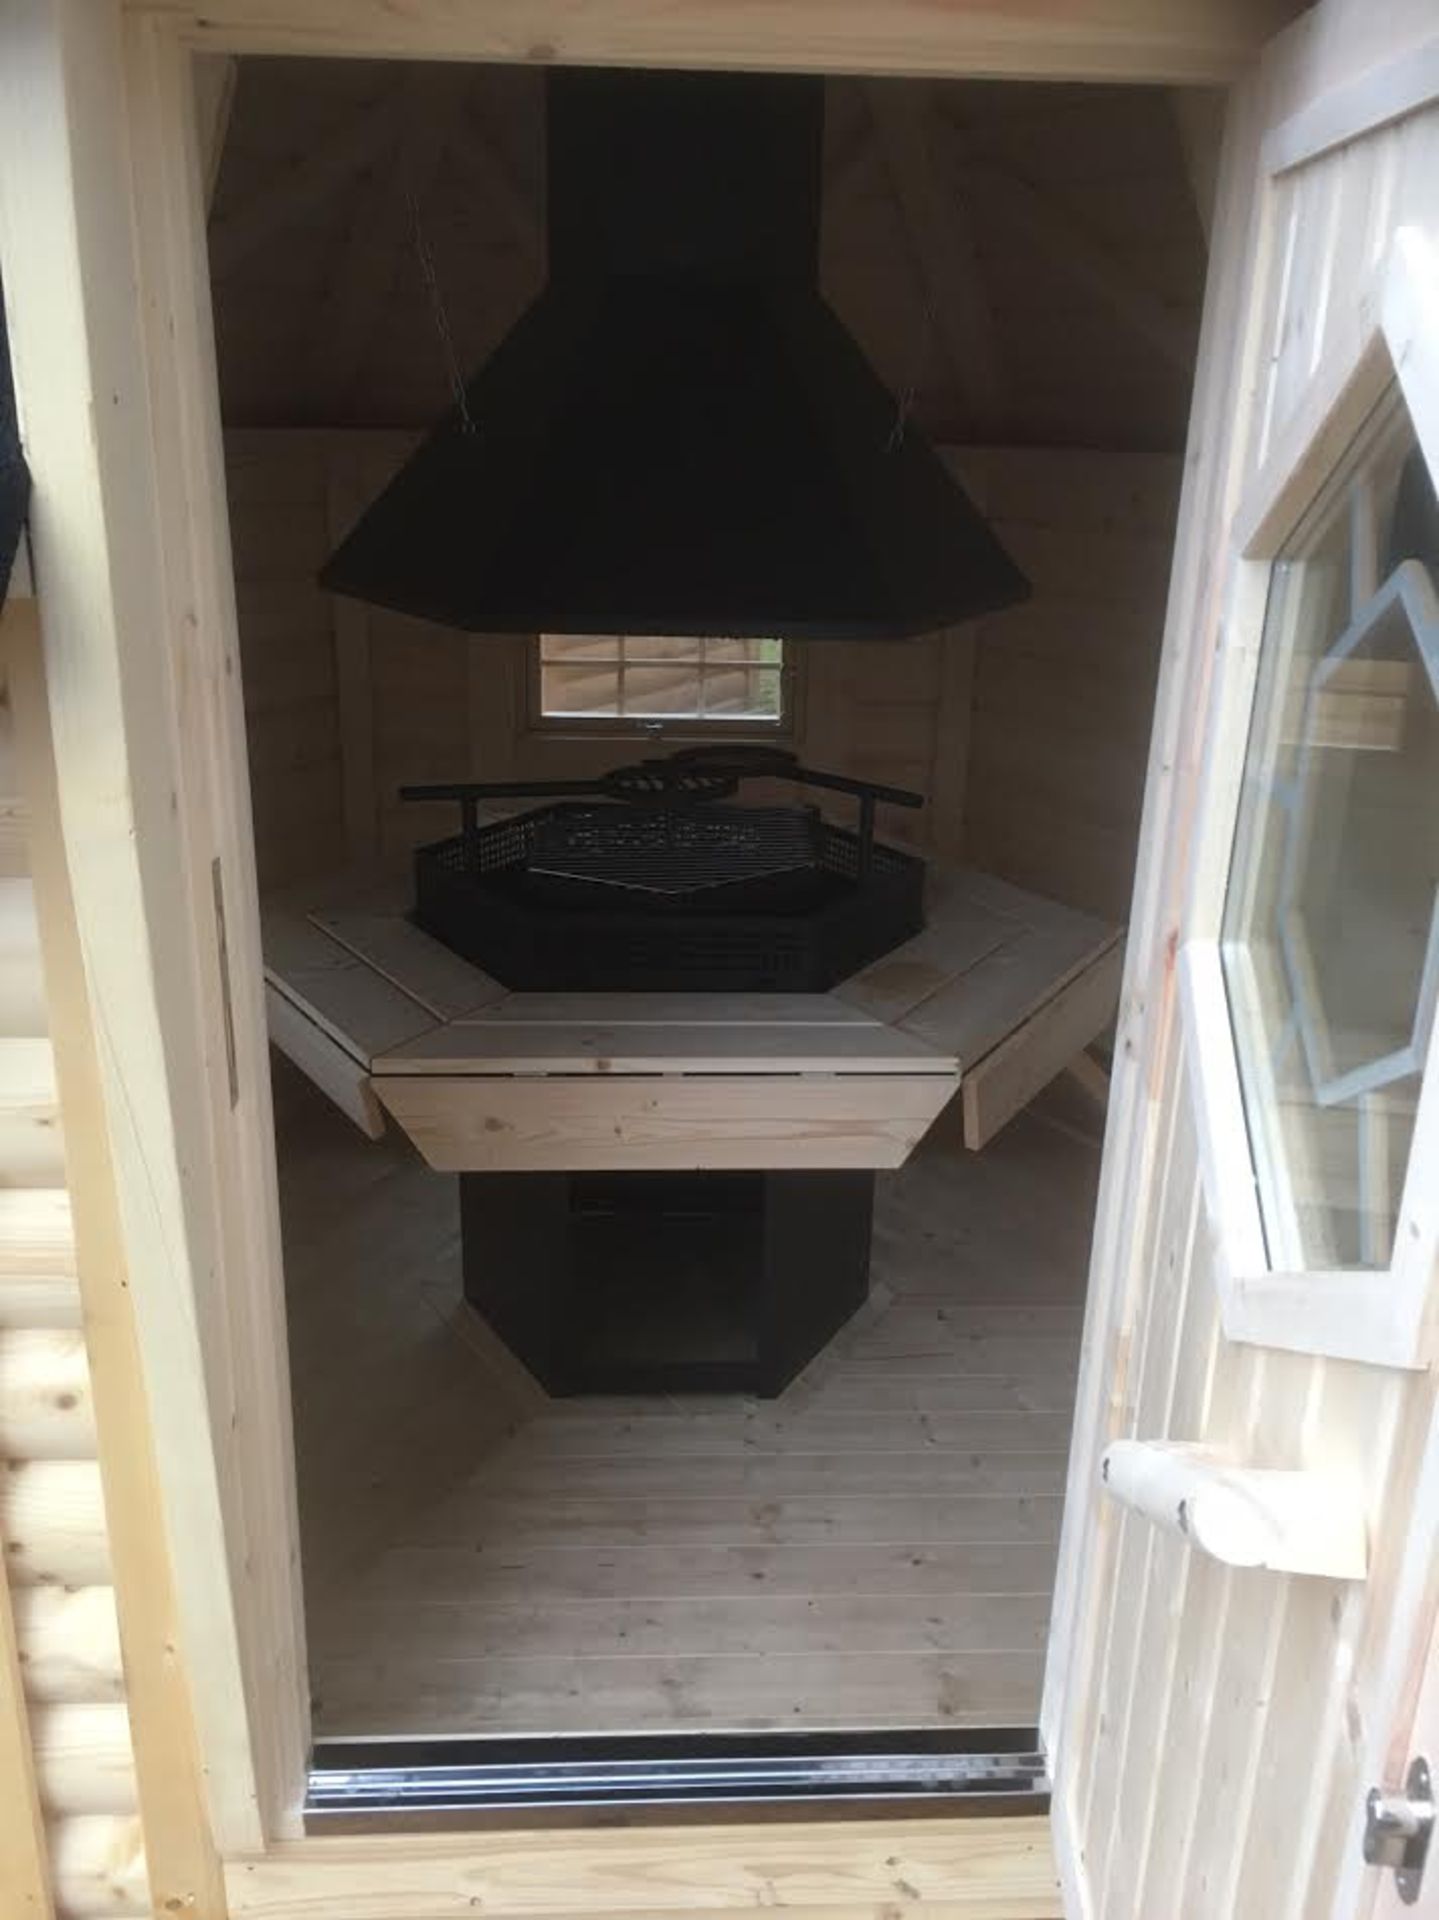 V Brand New 4.5m sq Grill Cabin - Inside Grill With Cooking Platforms & Table - Bitumen Roof - Image 4 of 4